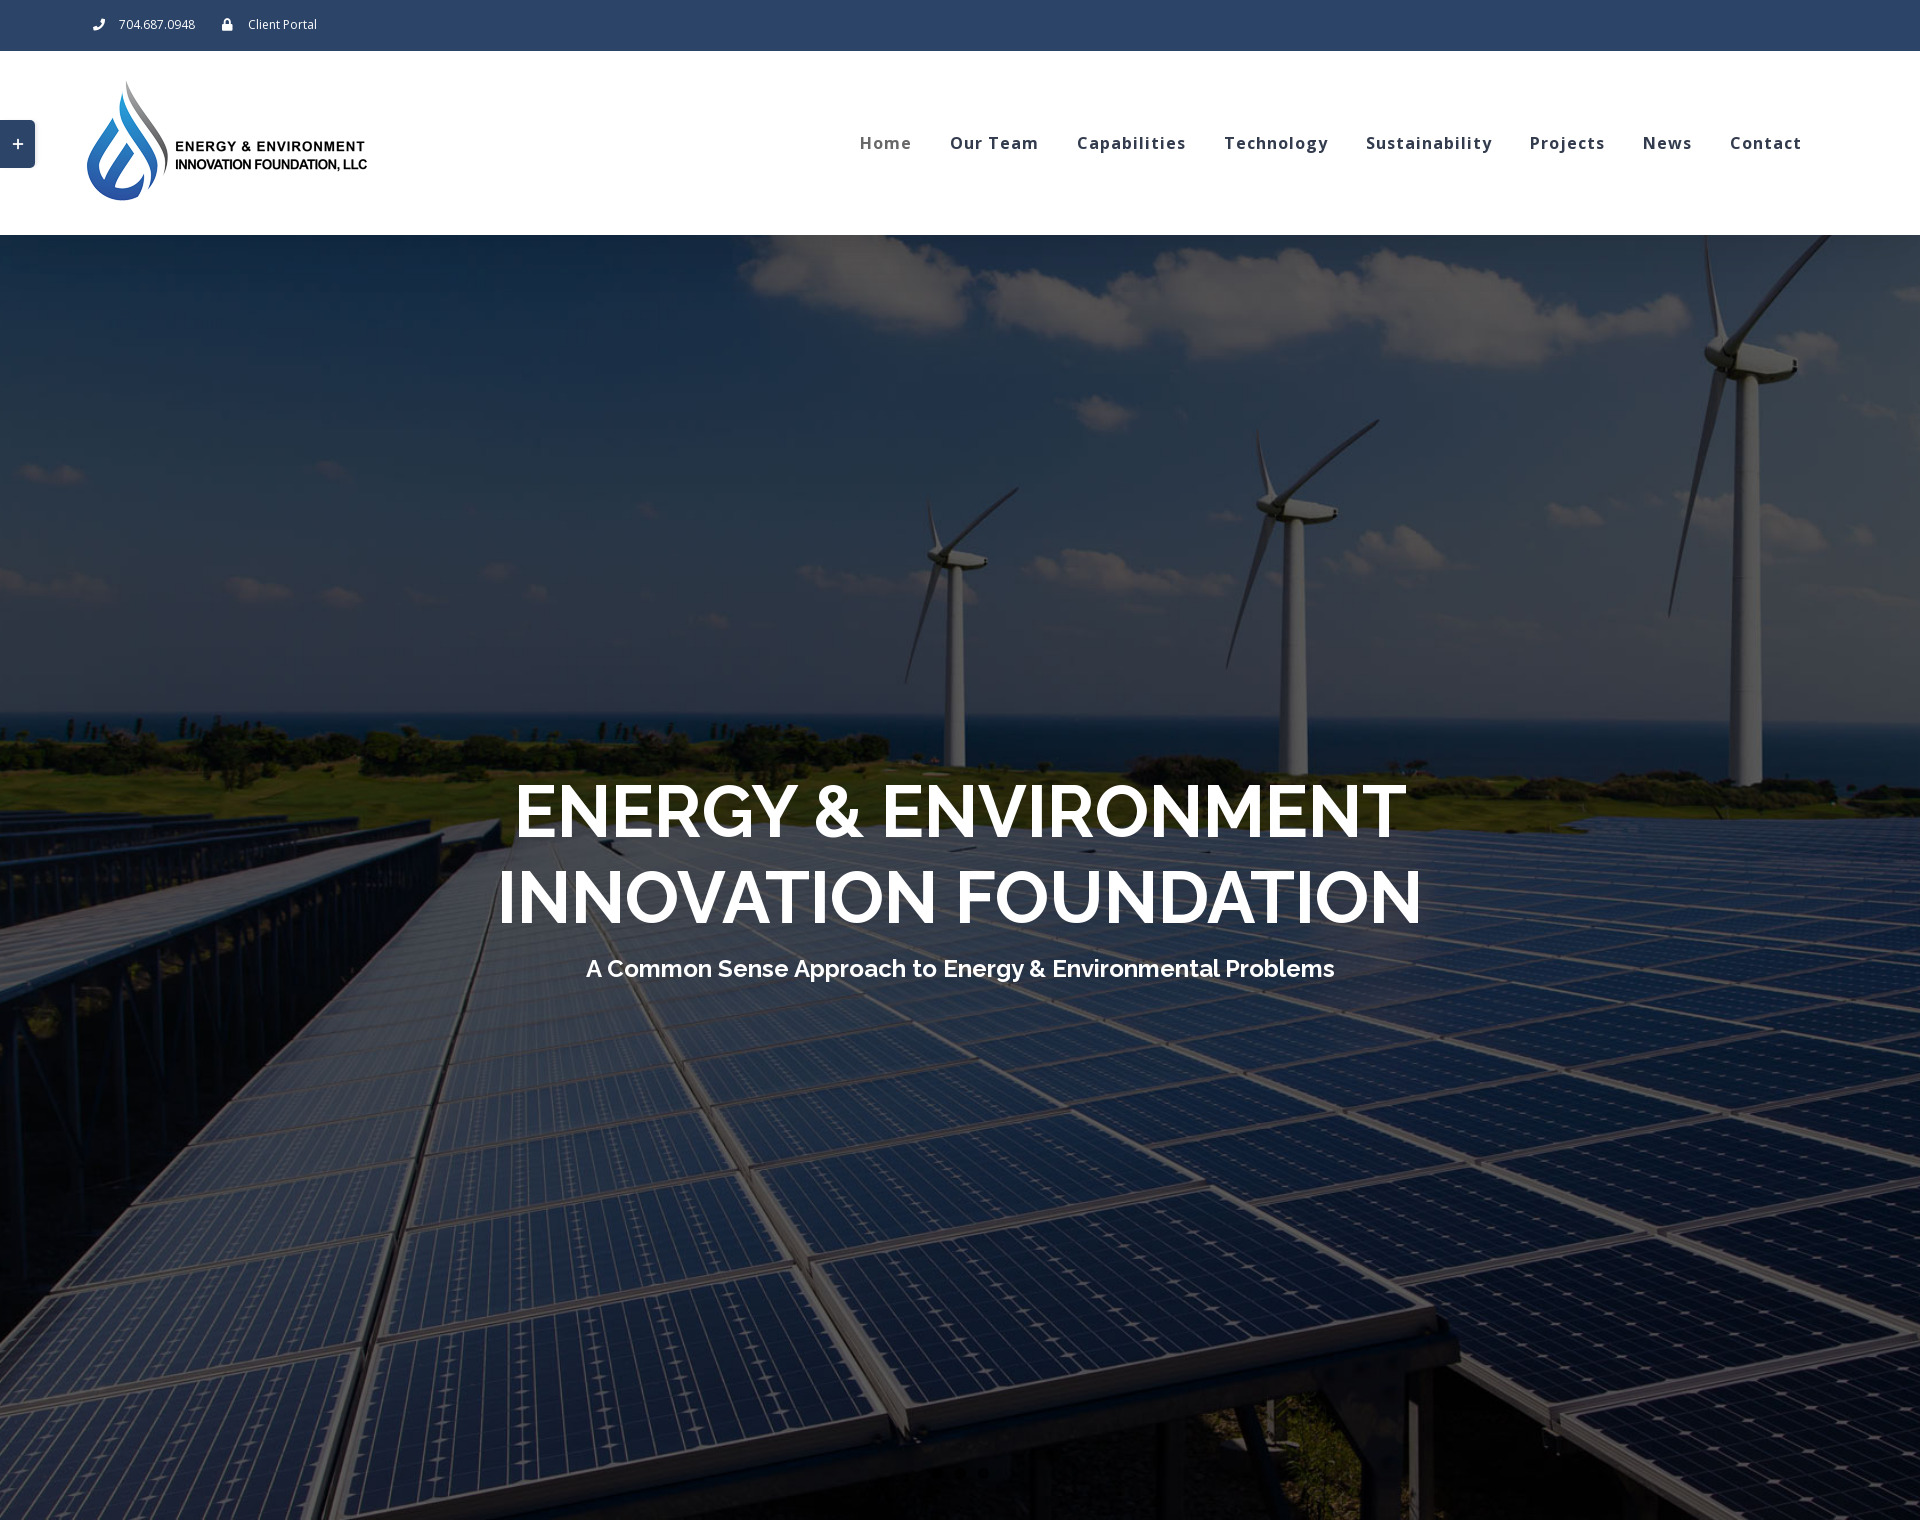 Energy & Environment Website by CCP Web Design in Charlotte NC